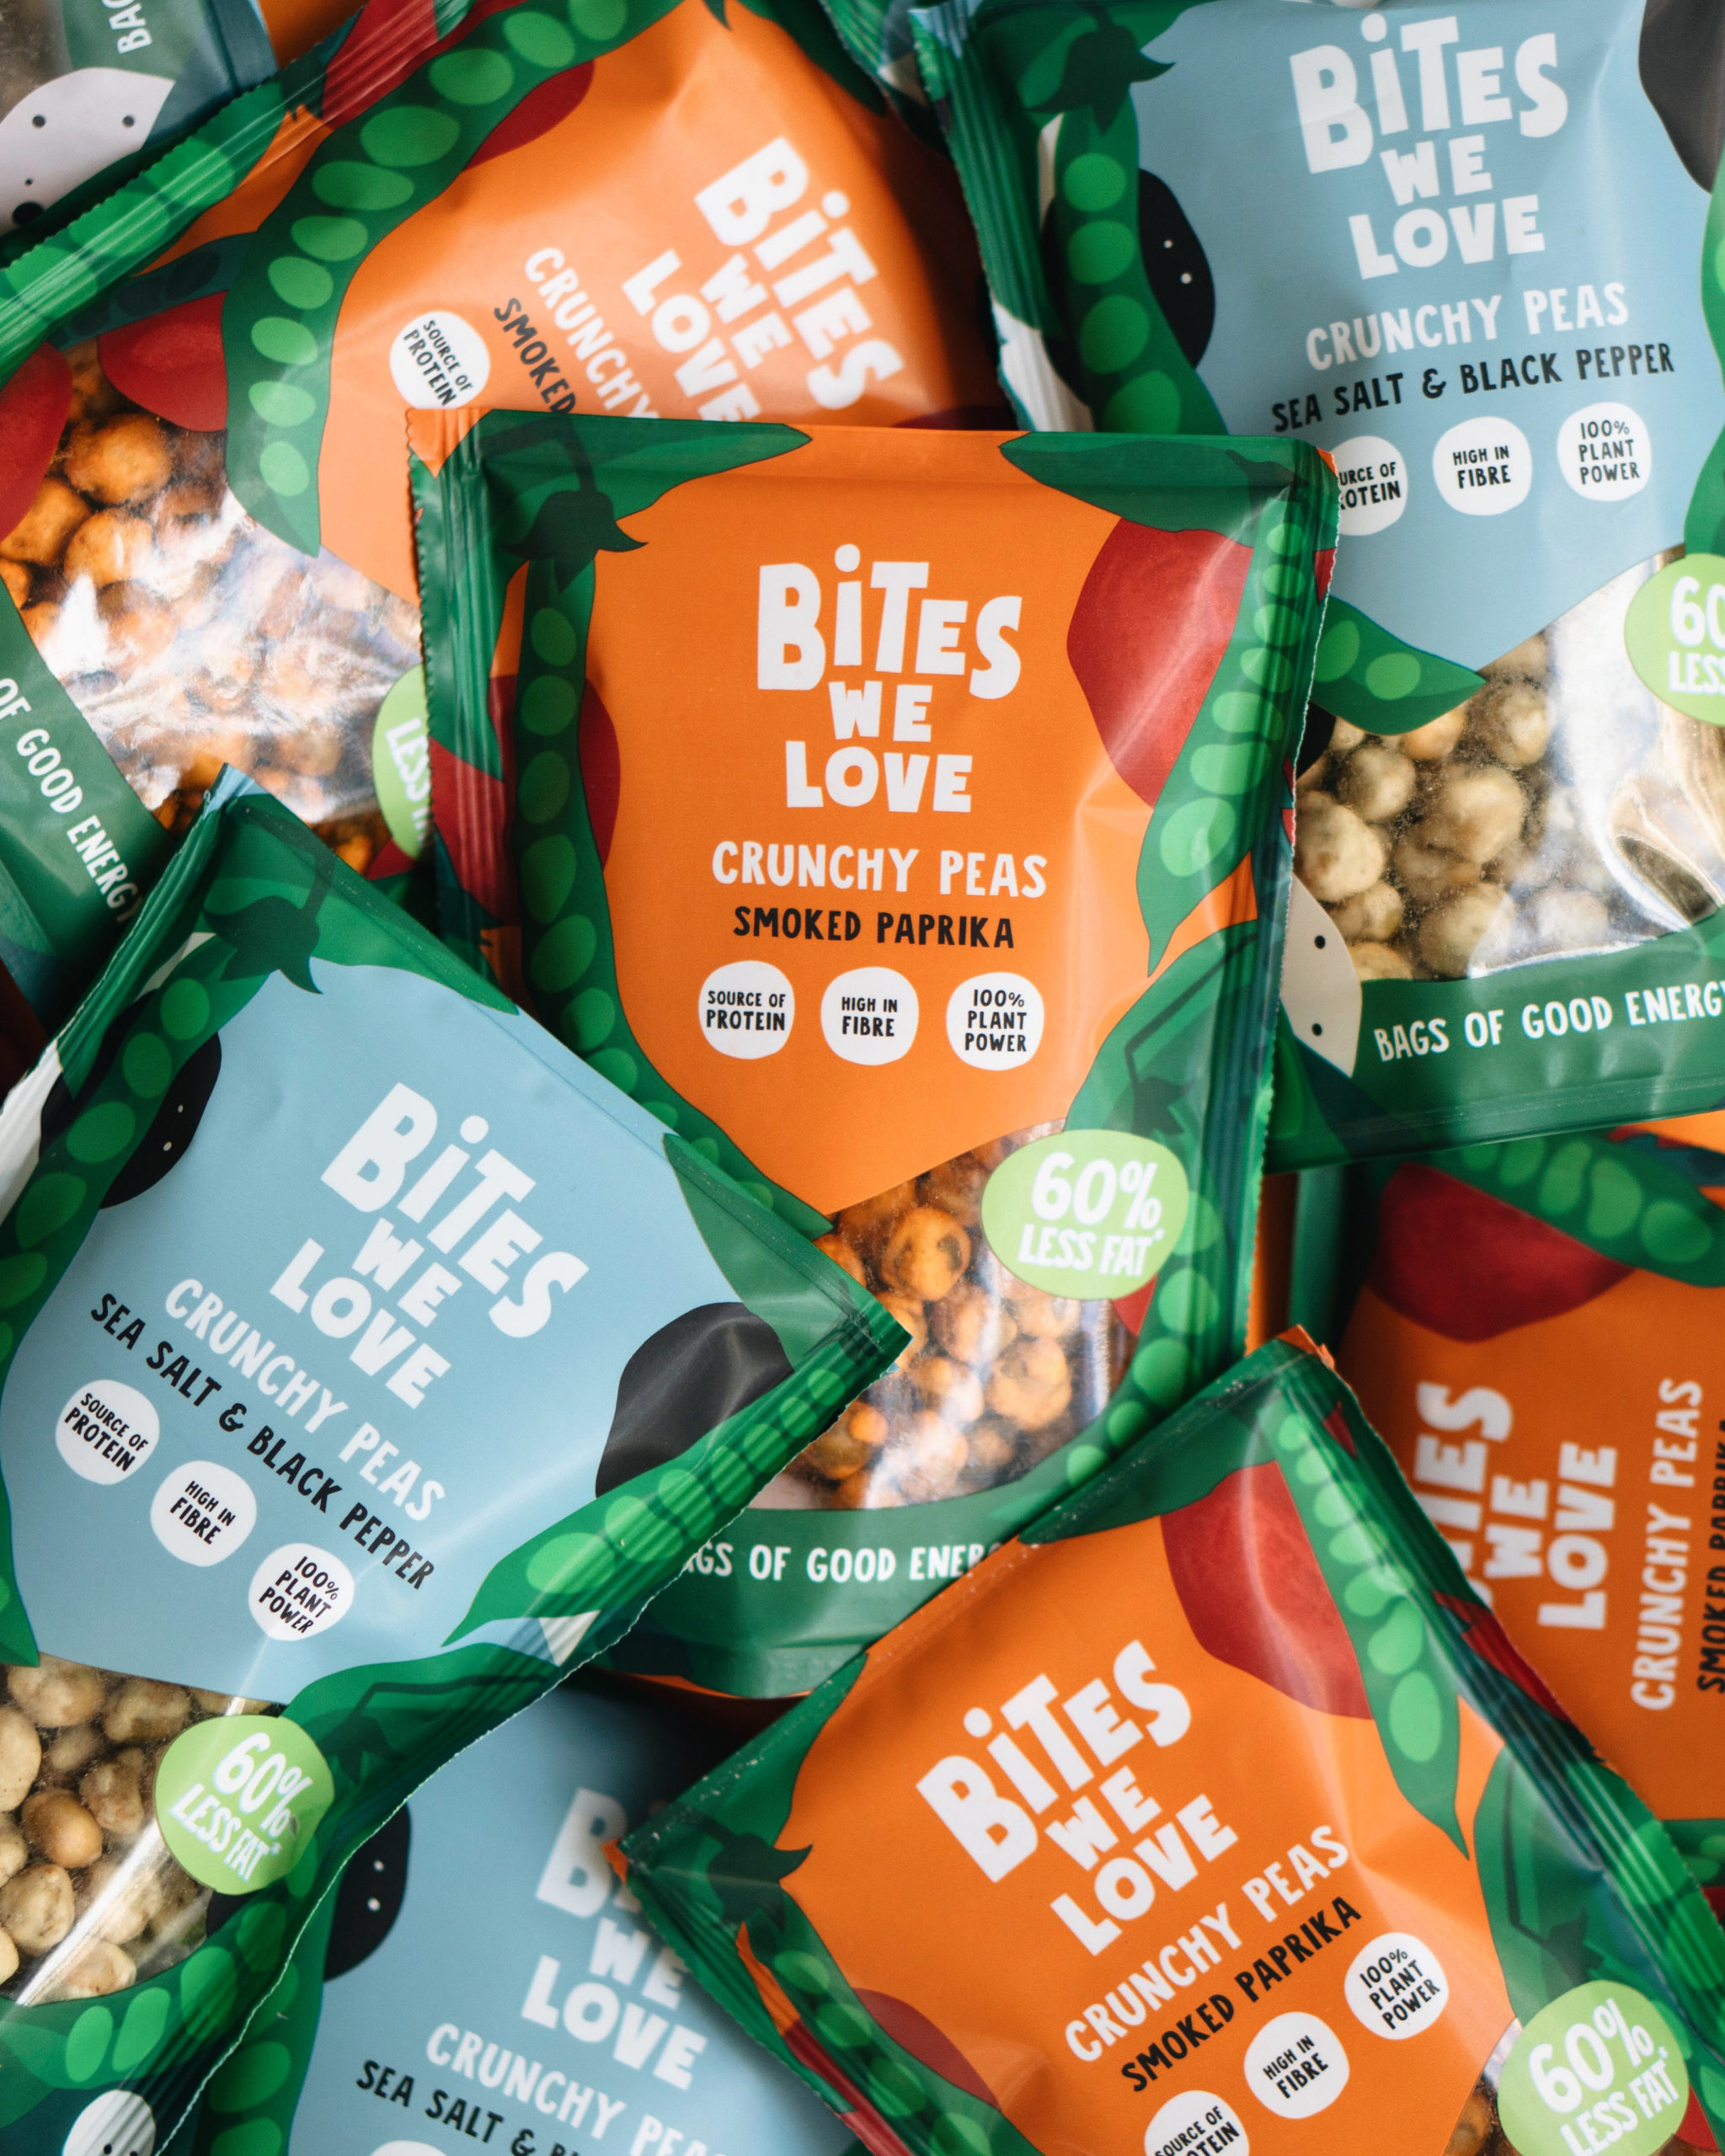 Dutch Supermarket Chain Jumbo Aims for 60% Plant-Based Proteins by